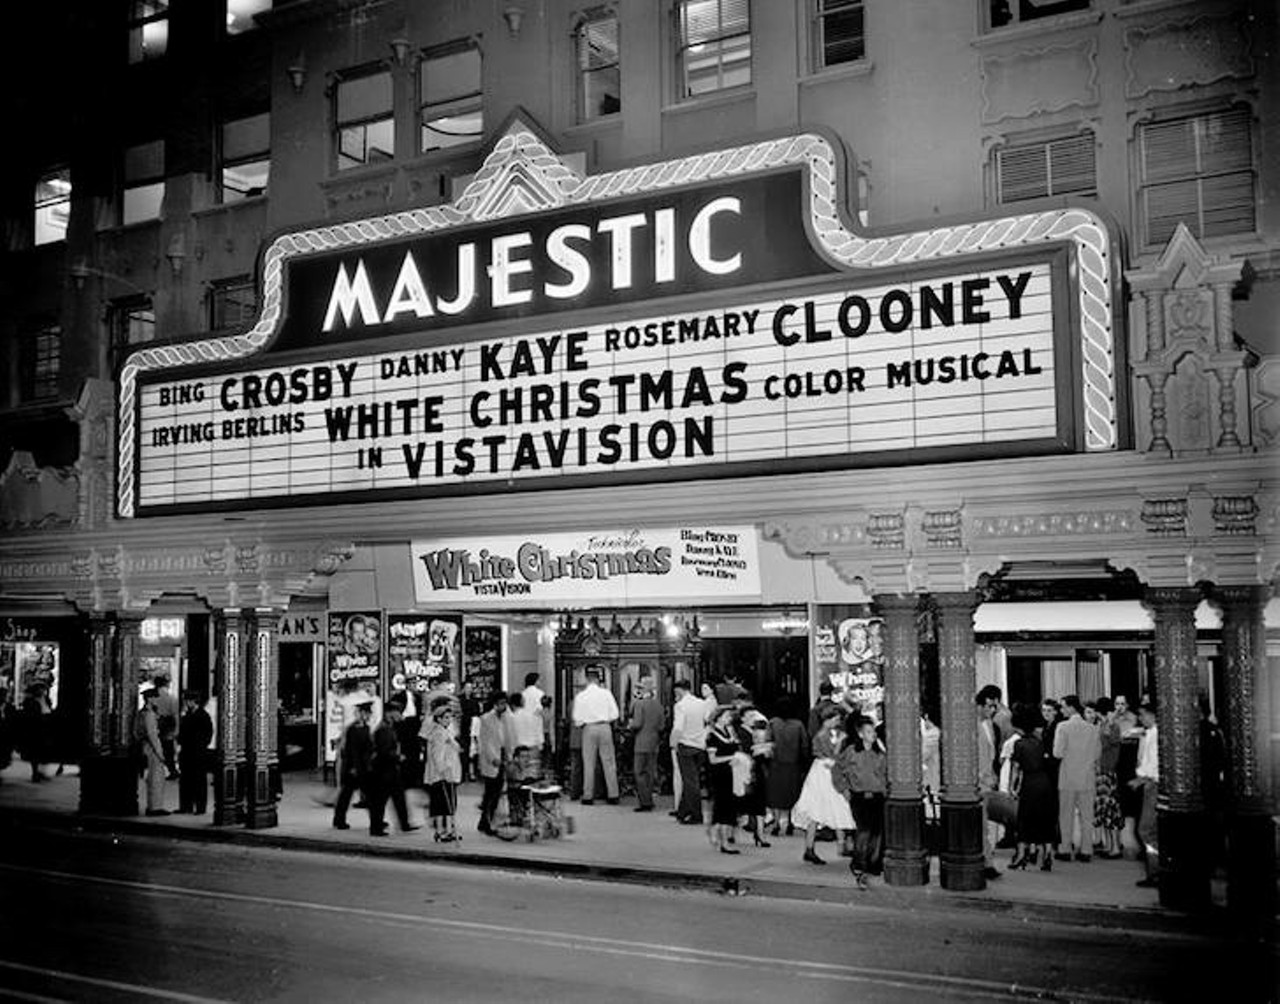 The Majestic Theater in 1954 during the release of "White Christmas."